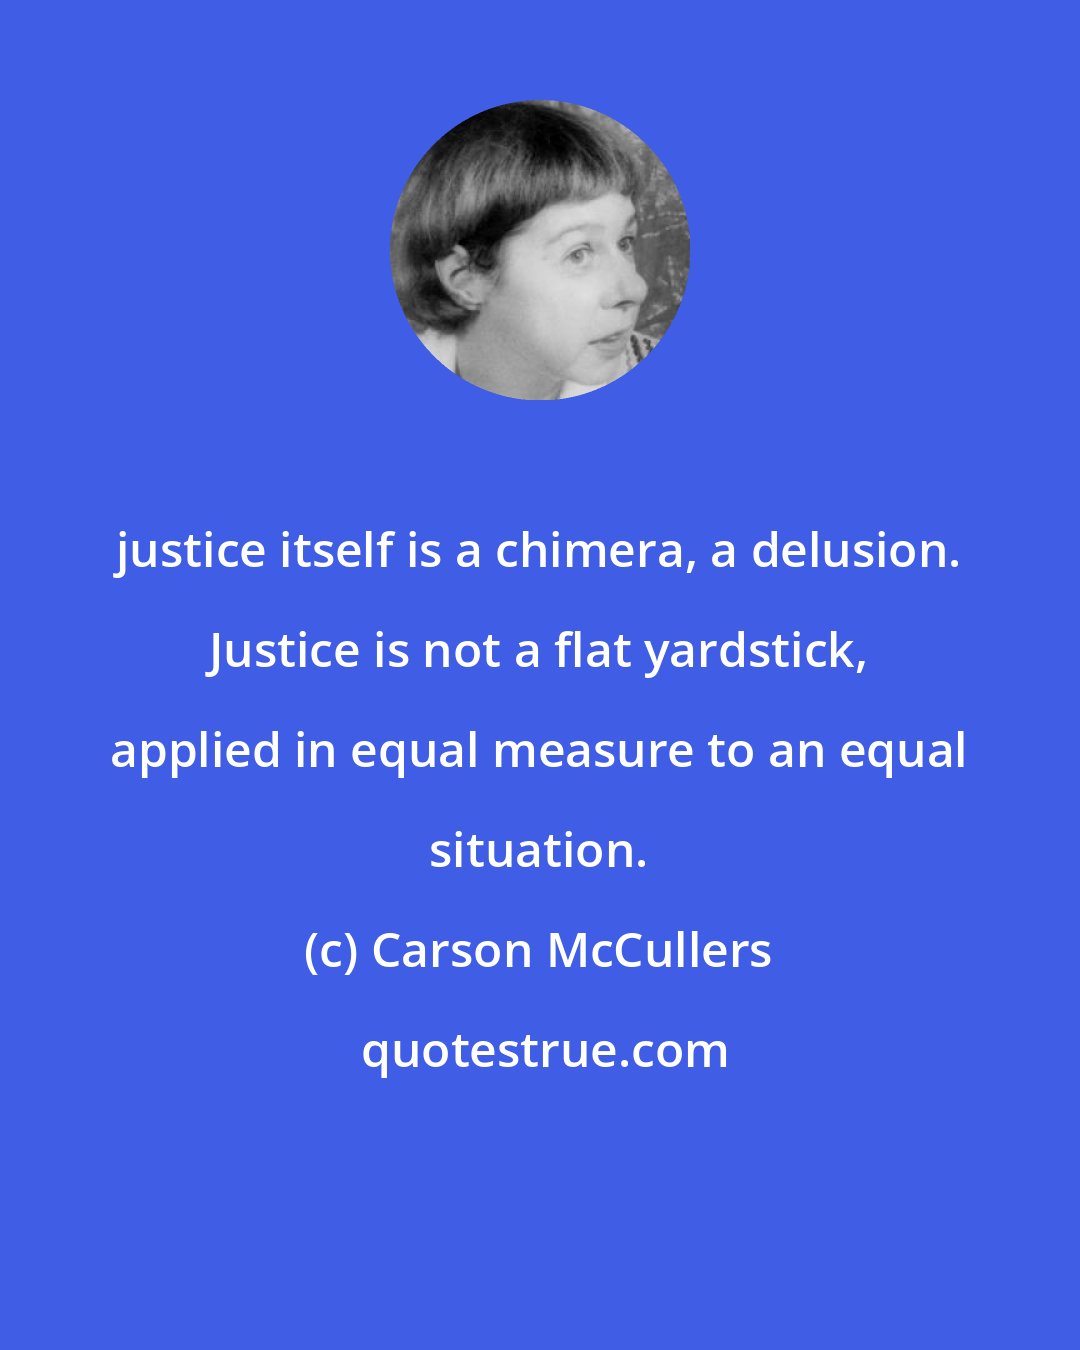 Carson McCullers: justice itself is a chimera, a delusion. Justice is not a flat yardstick, applied in equal measure to an equal situation.